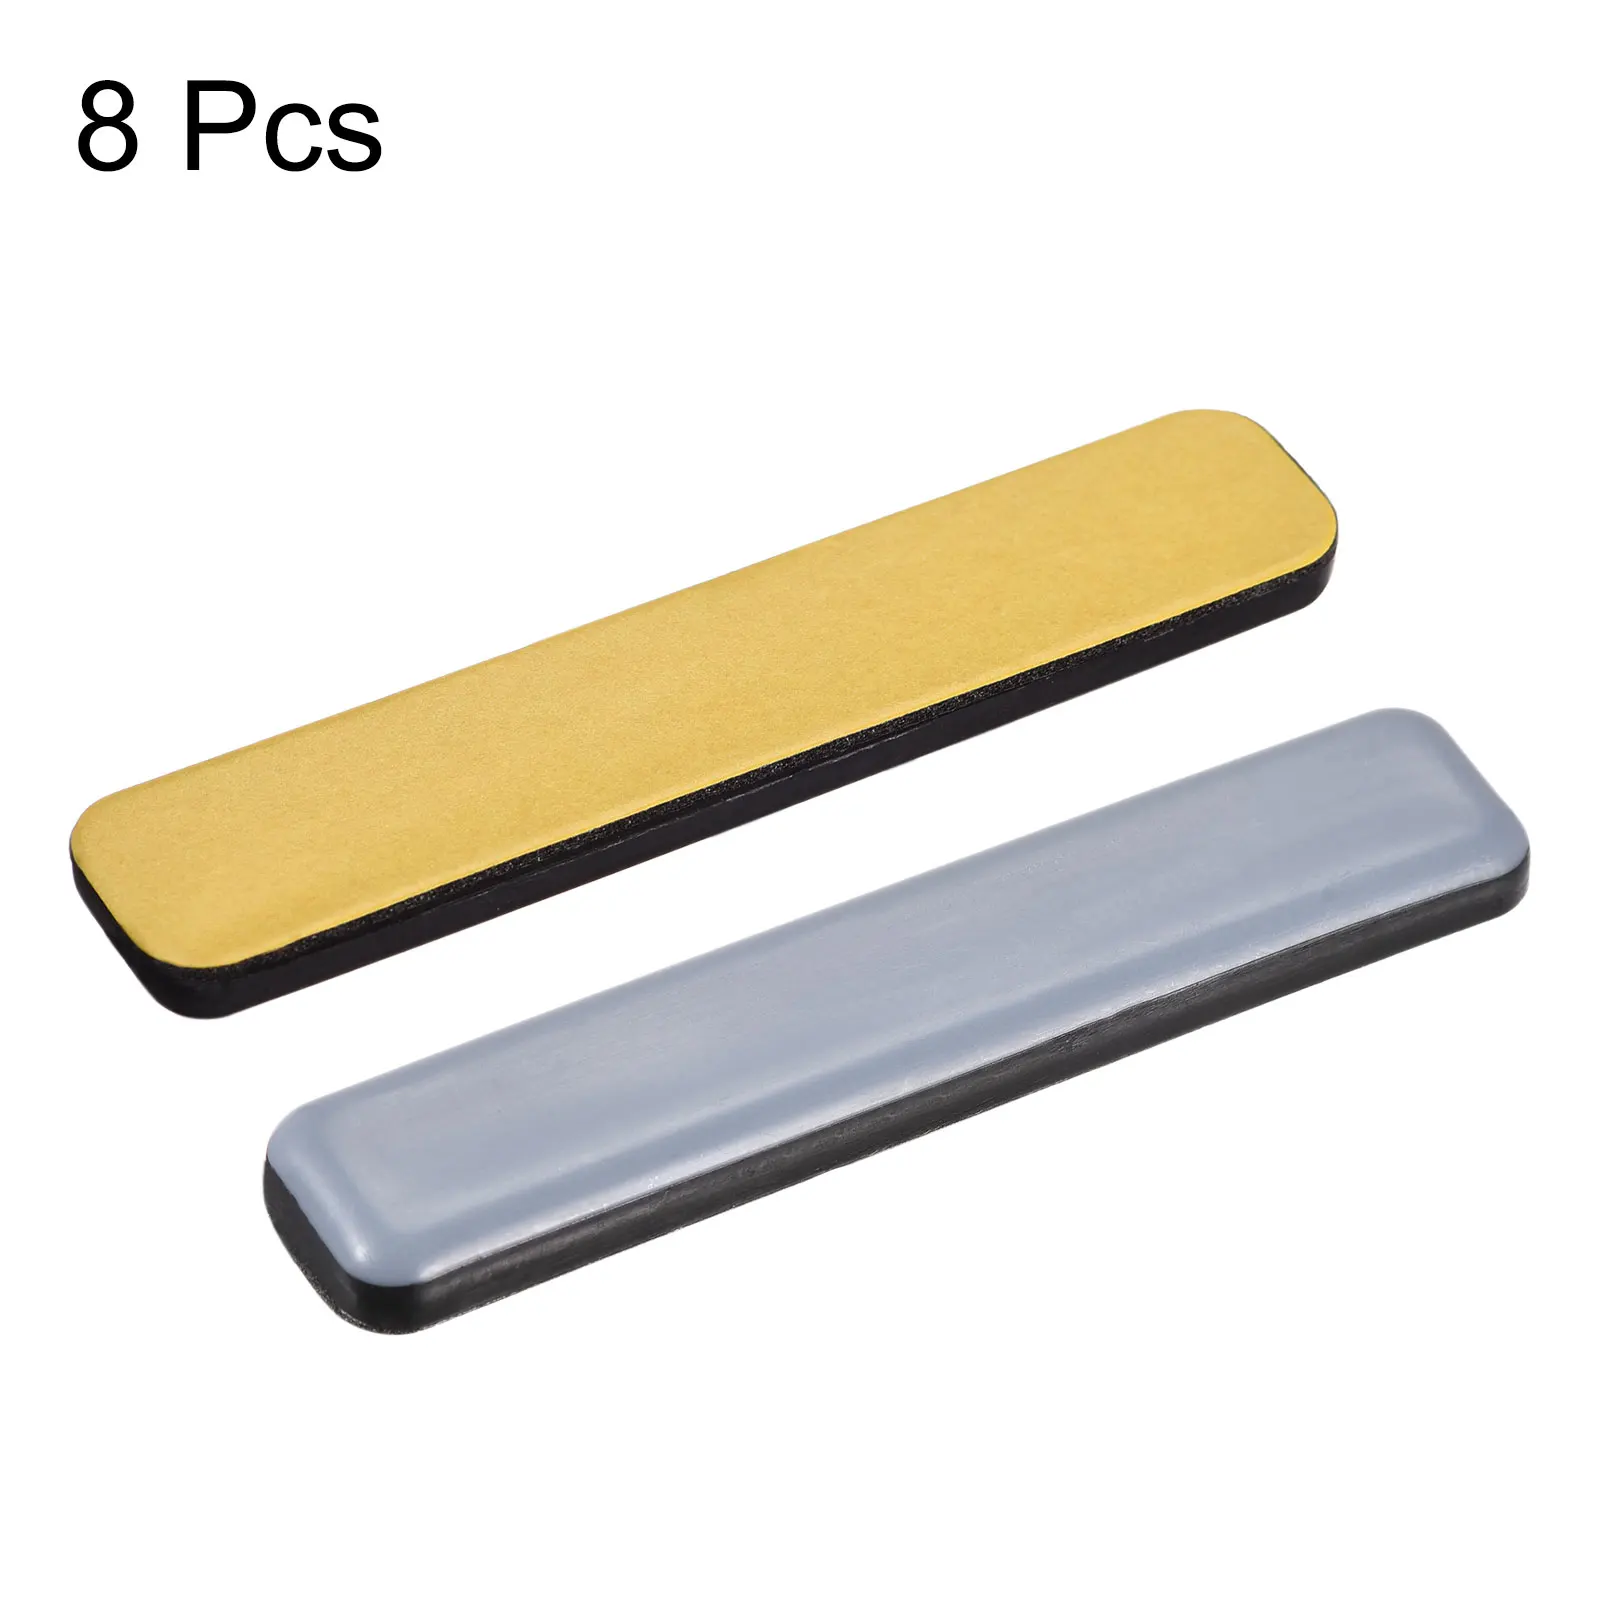 Uxcell 8 Pcs 75mm x 15mm Rectangle PTFE Furniture Sliders, Adhesive Self Stick for Wood Floors, Ceramic Tile and Carpeting